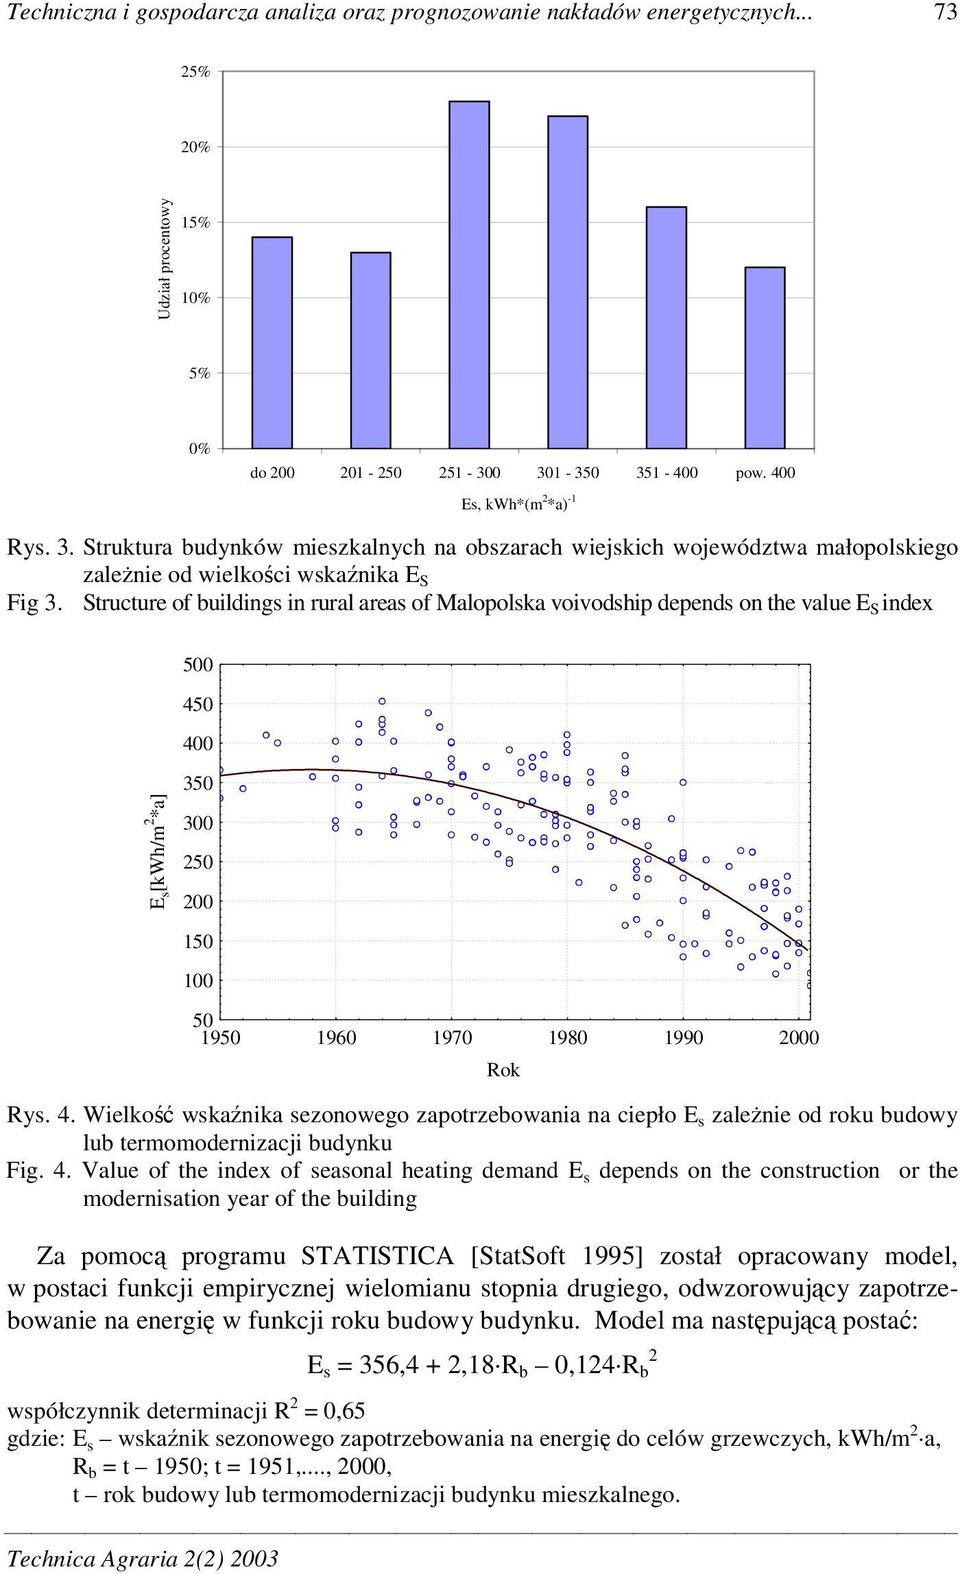 Structure of buildings in rural areas of Malopolska voivodship depends on the value E S index E s [kwh/m 2 *a] 500 450 400 350 300 250 200 150 100 Technica Agraria 2(2) 2003 50 1950 1960 1970 1980